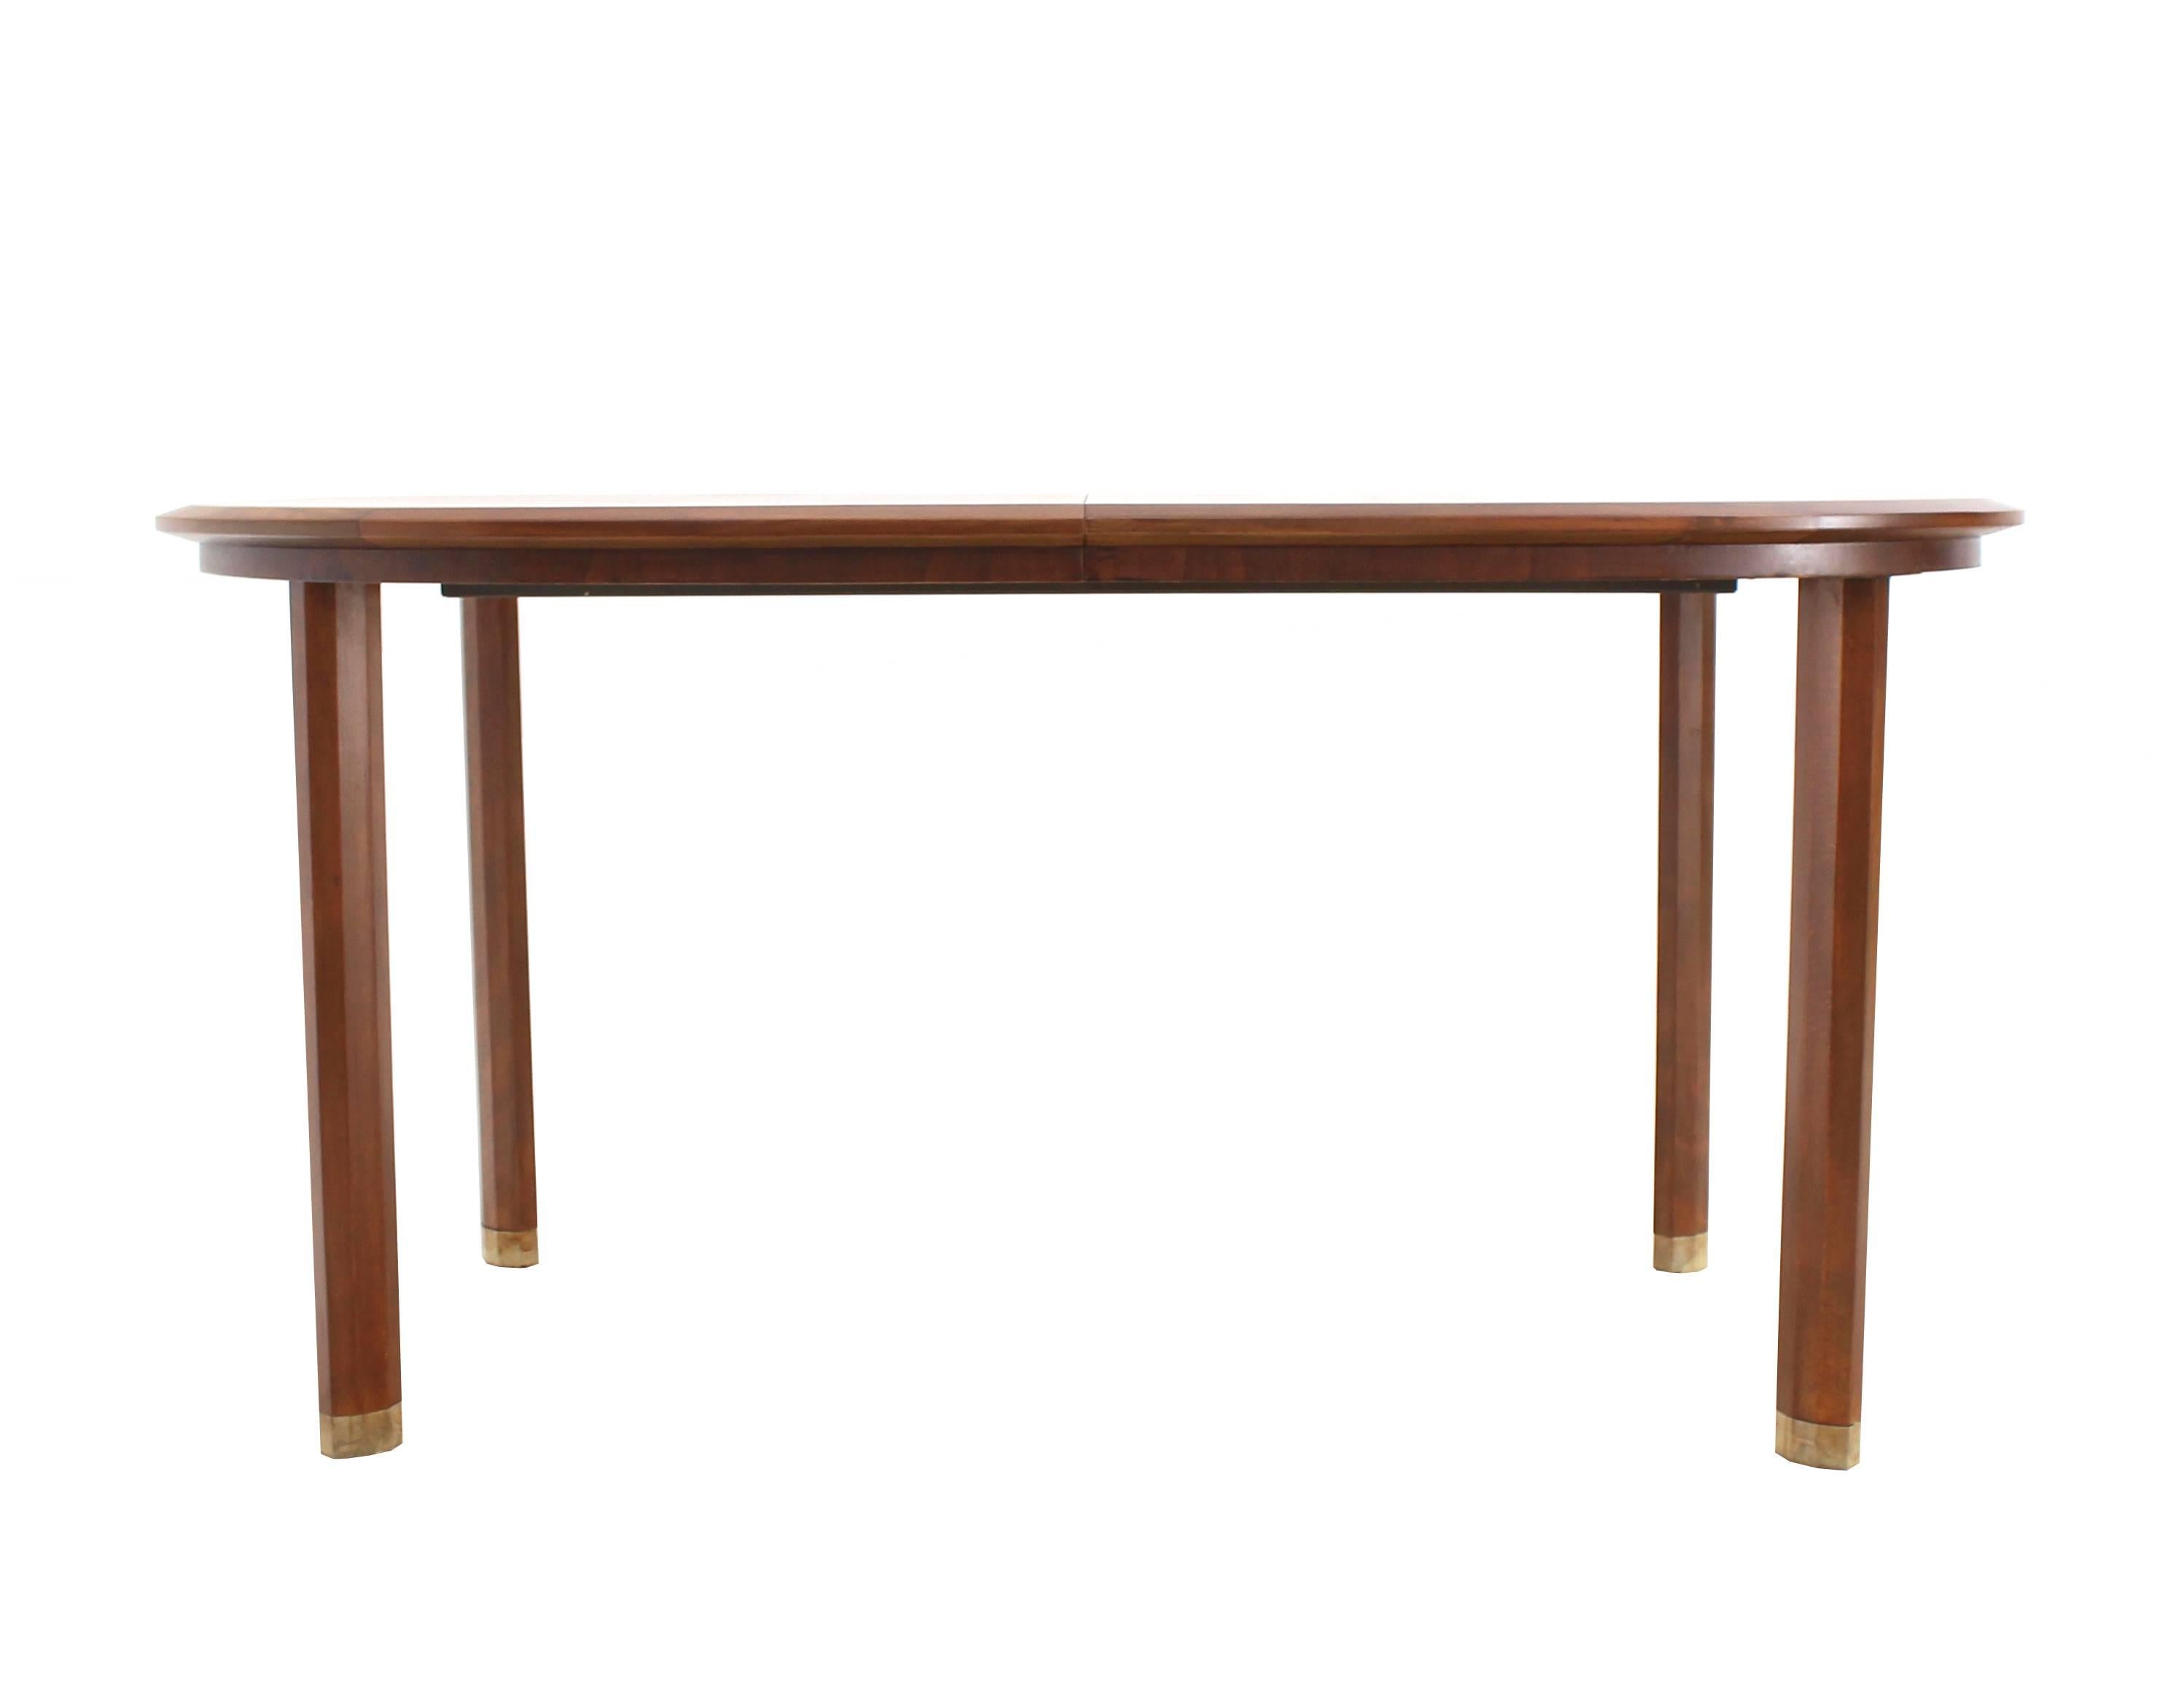 Edmond Spence Dining Table with Two Leaves In Excellent Condition For Sale In Rockaway, NJ